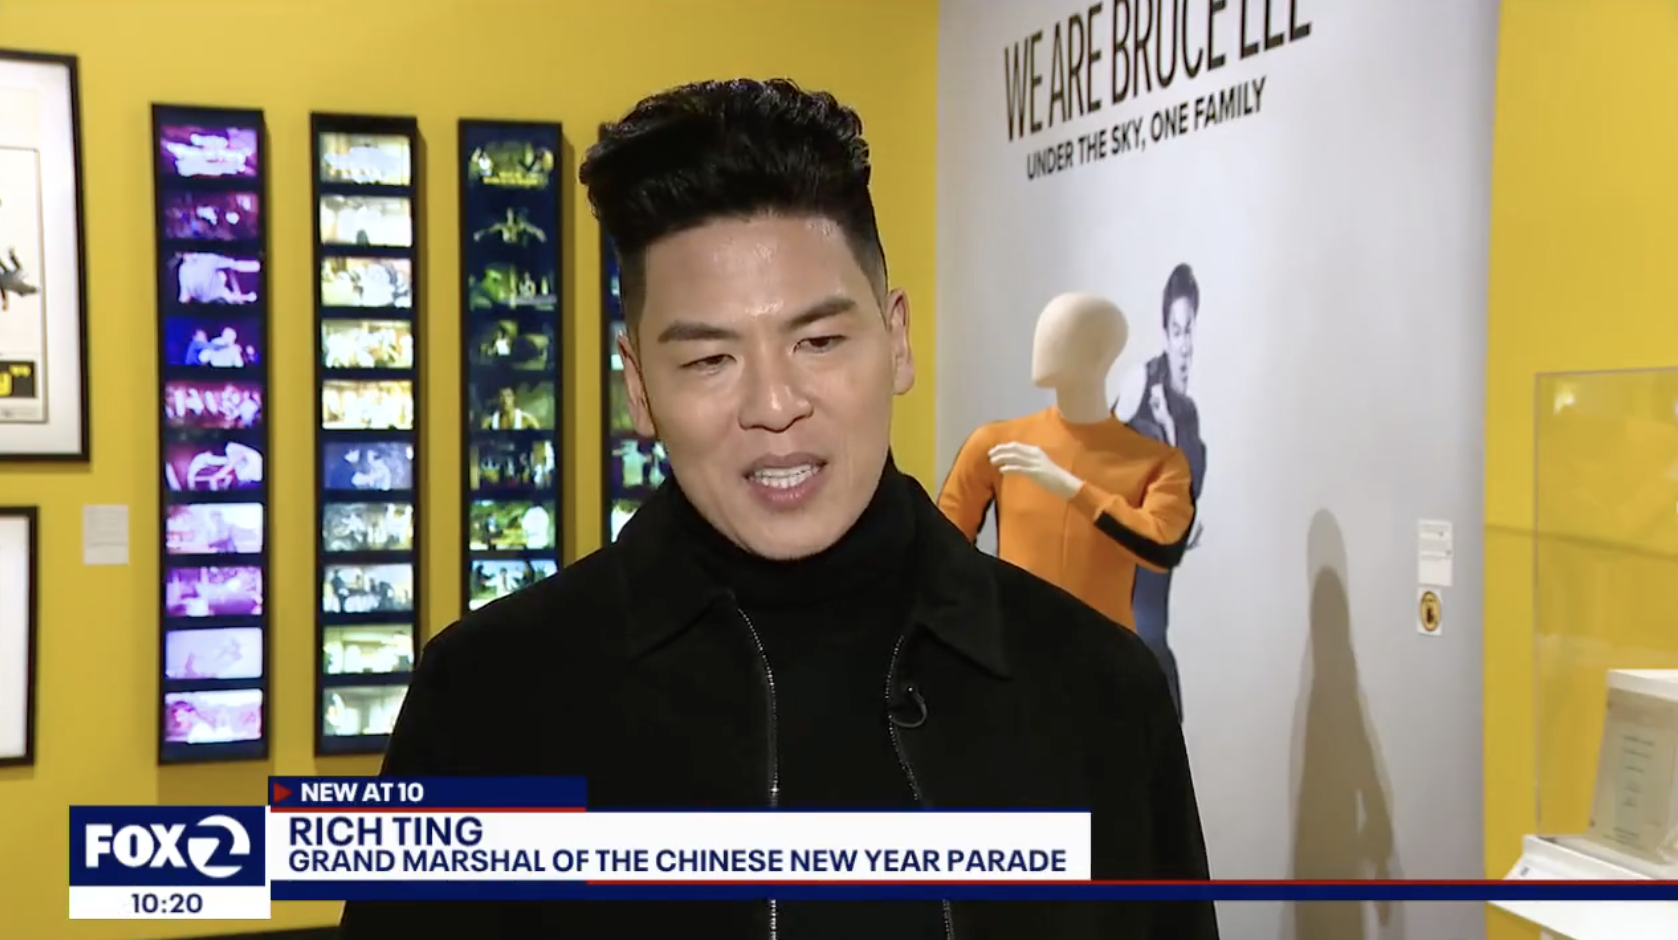 Actor Rich Ting returns to the Bay Area for new role: Grand Marshal of the San Francisco Chinese New Year Parade